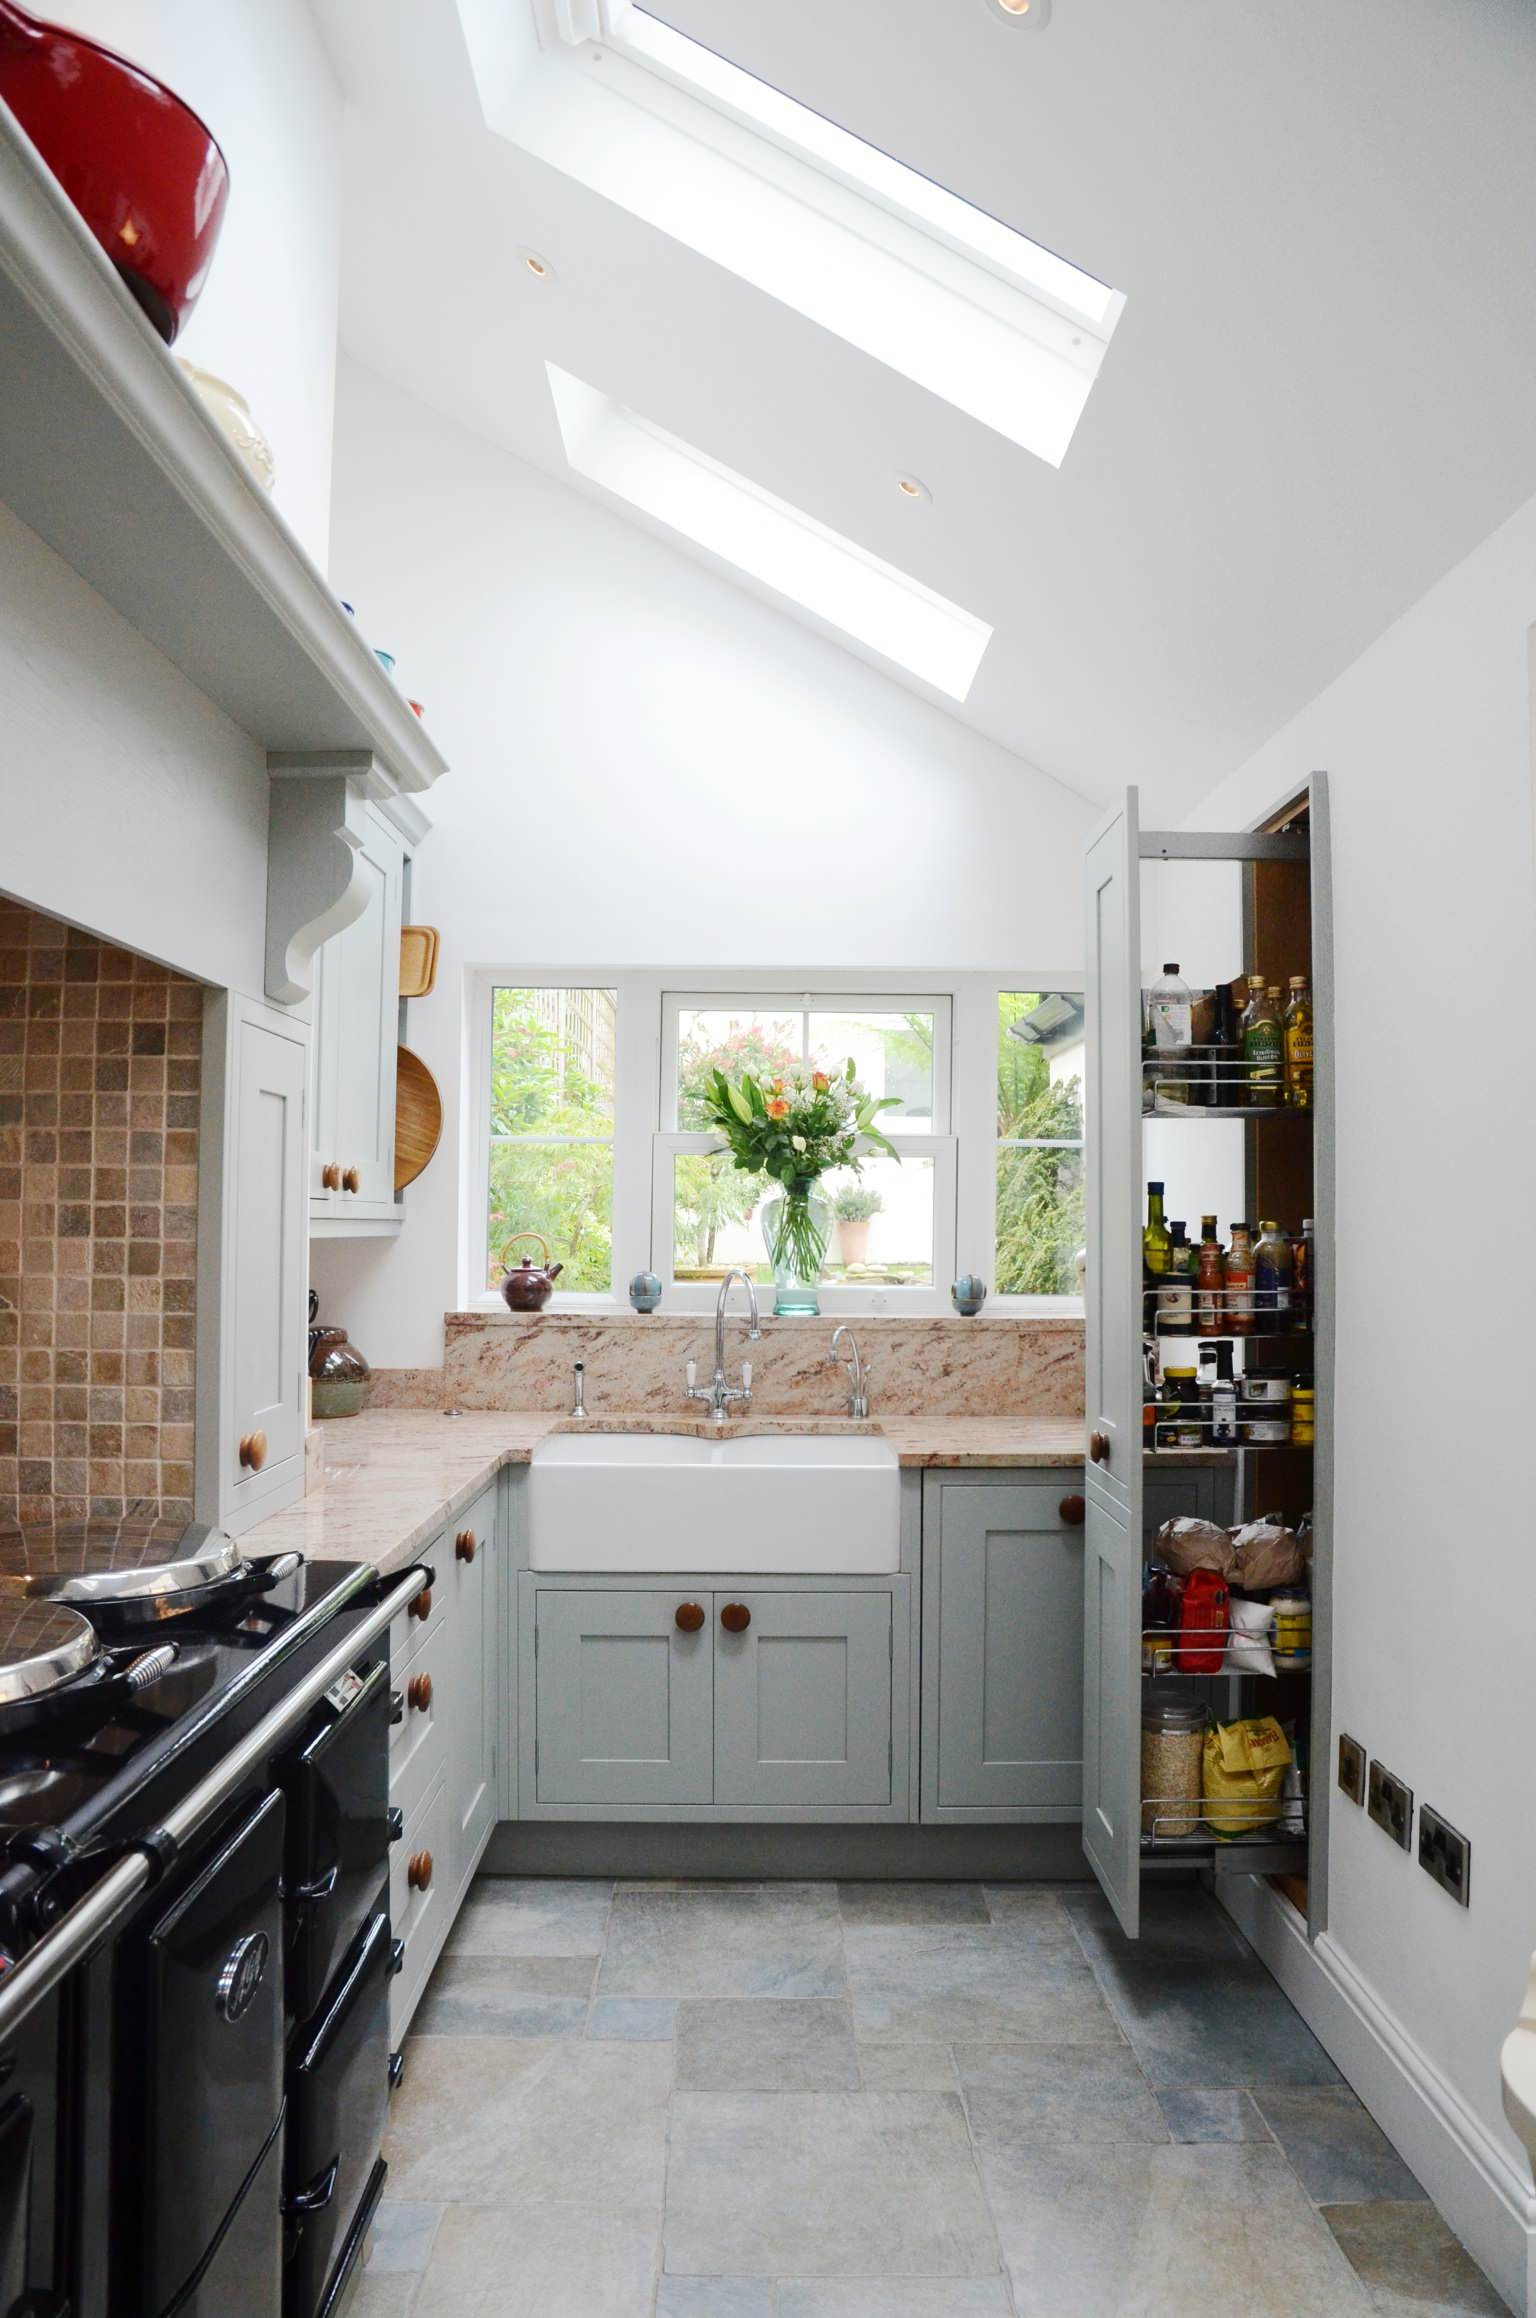 Pantry in Kitchen with Angled roof